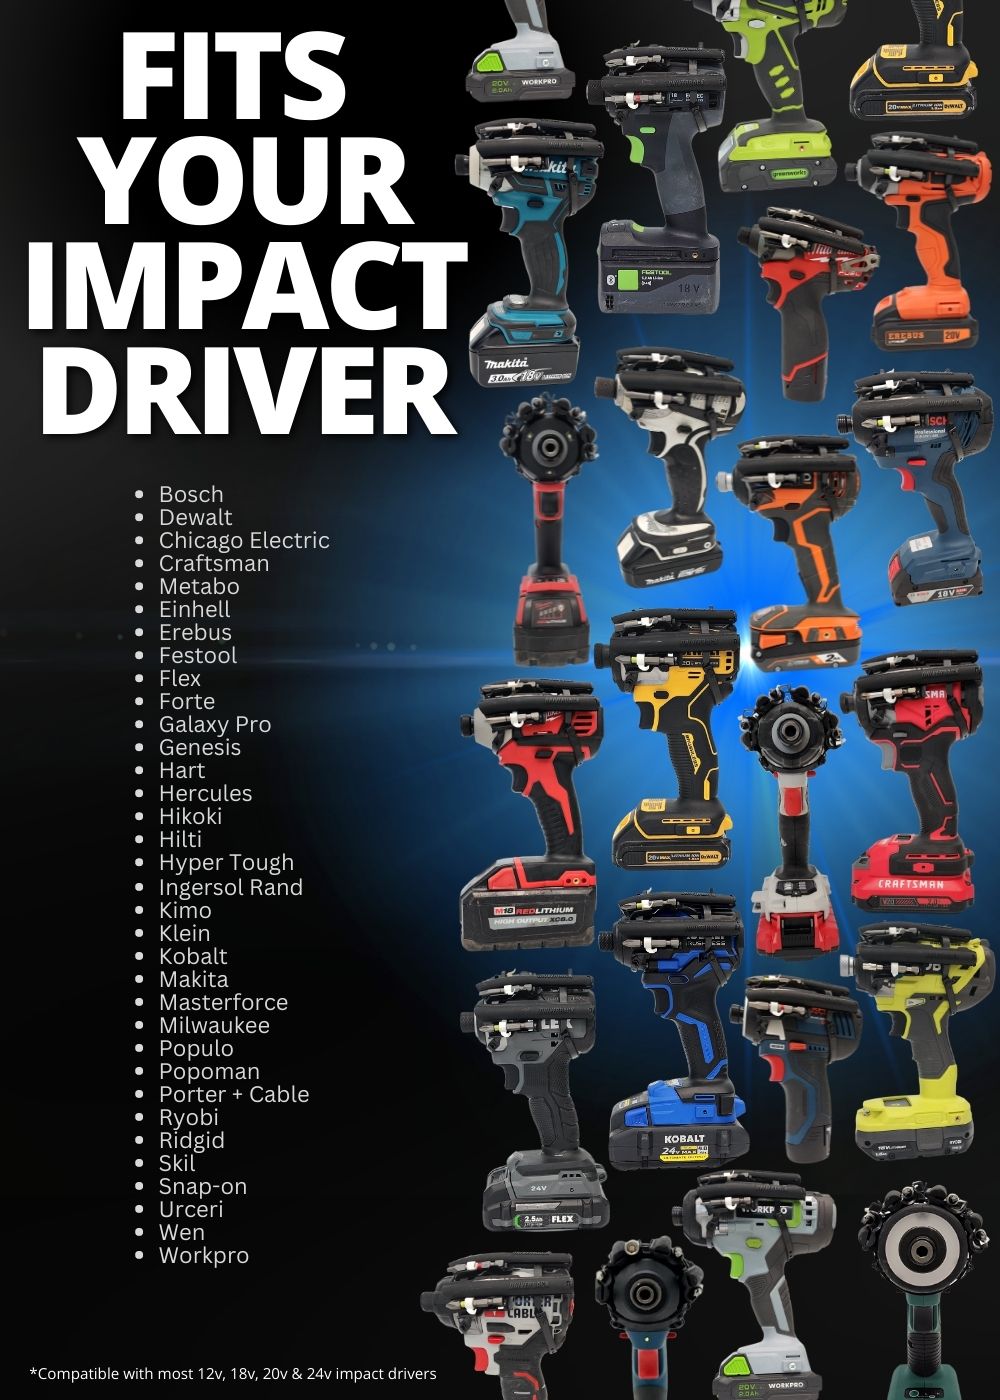 Full list of impact drivers that Driverback is compatible with.